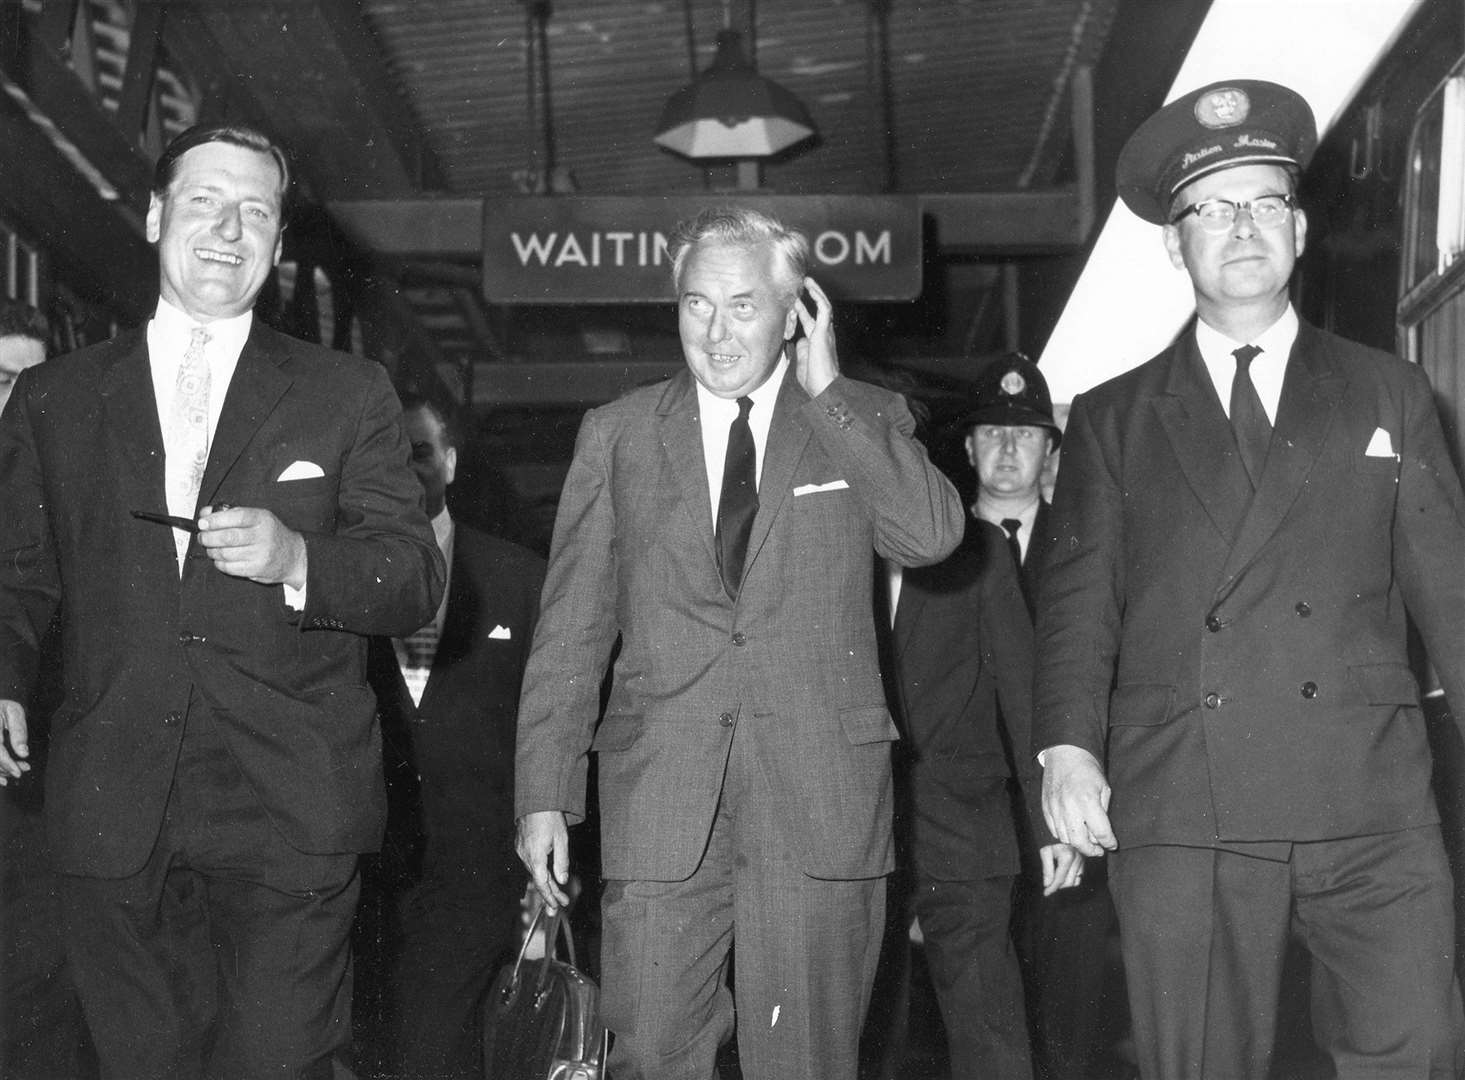 Prime Minister Harold Wilson, who reportedly briefed officials against showing the film, arrives at Dover Marine Station for a visit to the town in 1964. Photo: Jon Iverson, Dover Museum